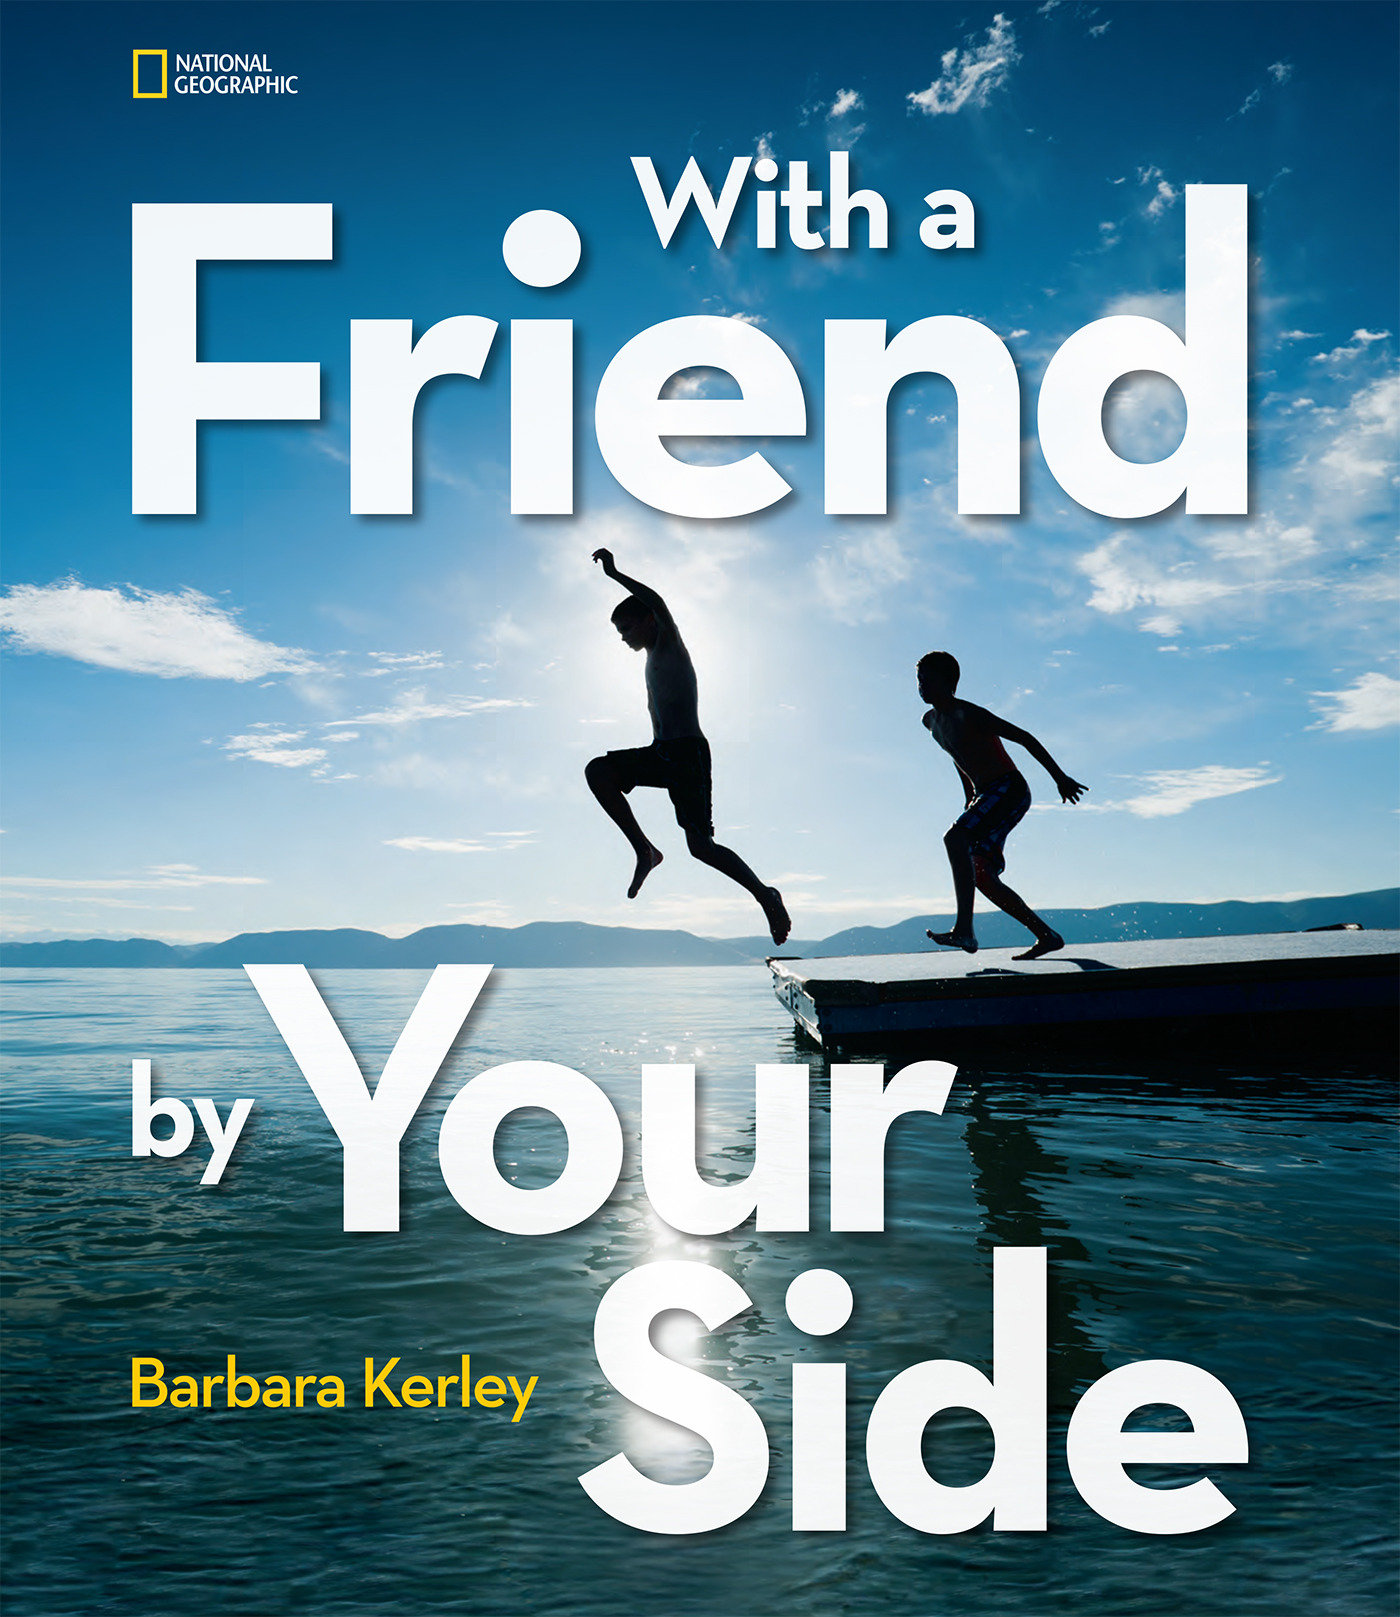 With A Friend By Your Side (Hardcover Book)